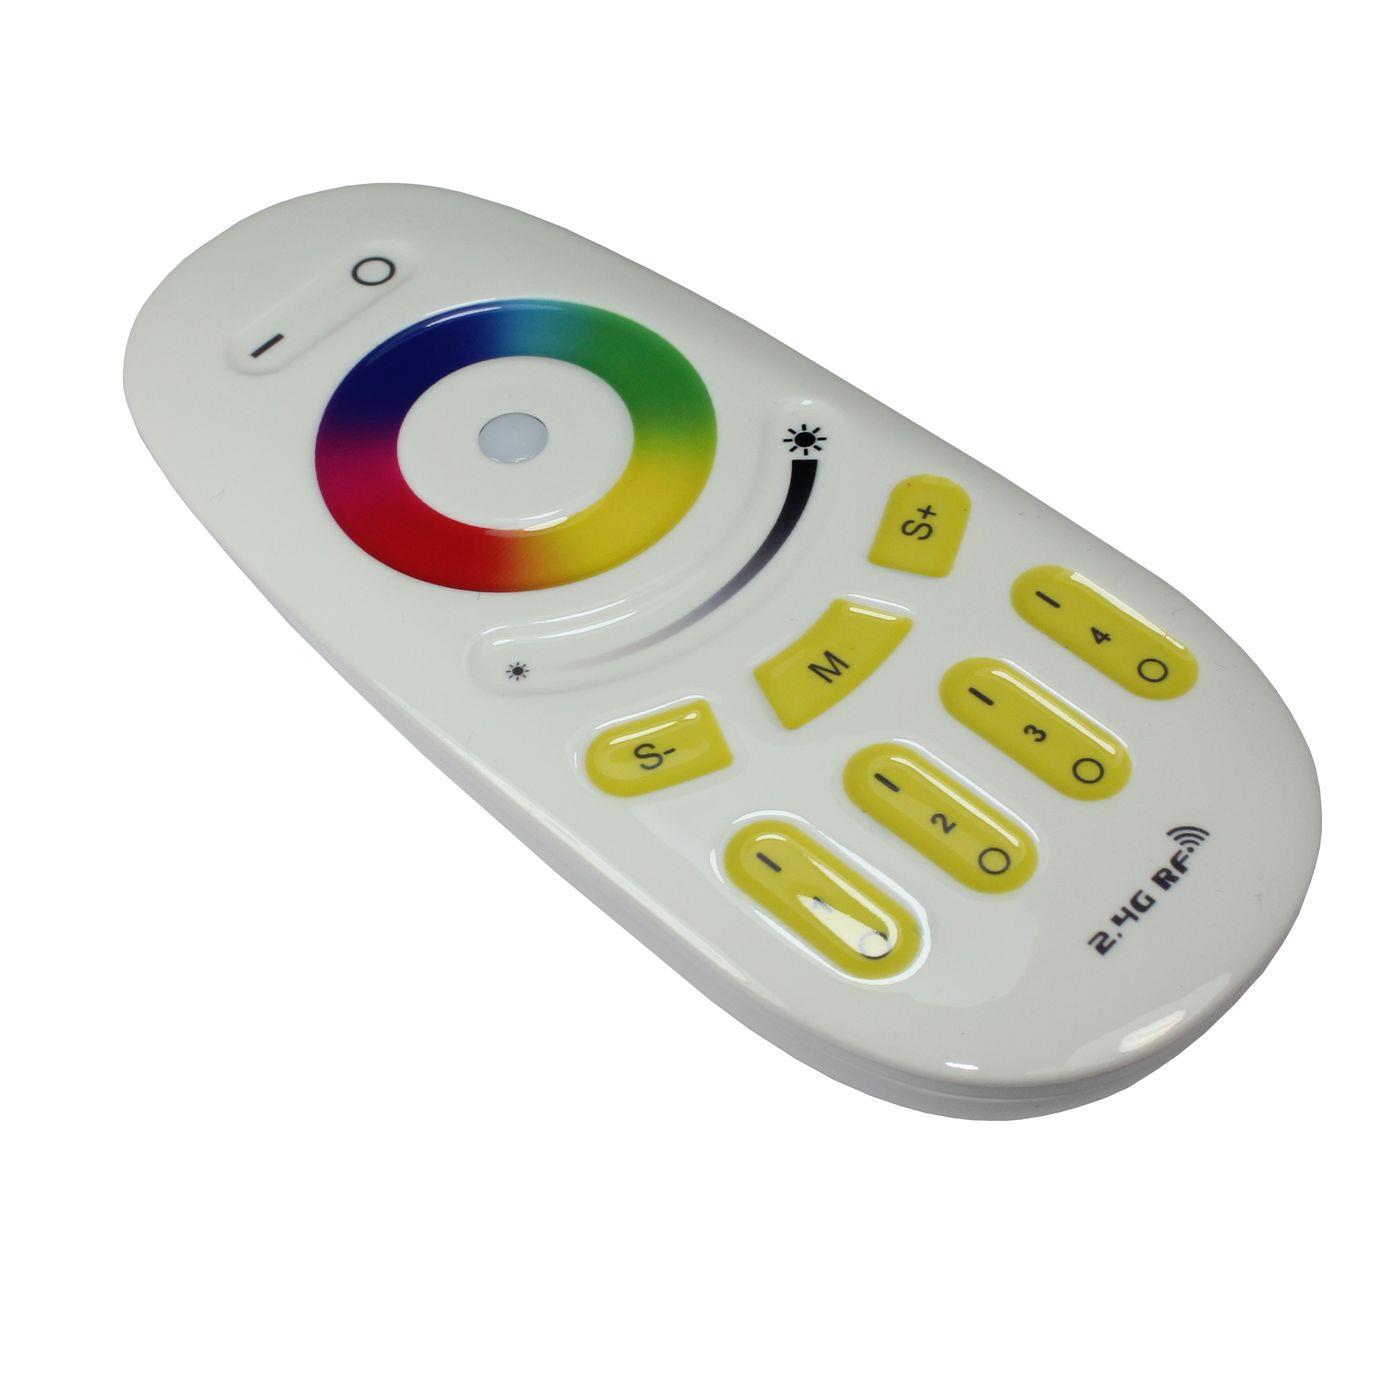 MiLight MiBoxer RGB RGBW LED 4-Zone Remote control Touch White for colour changing strips 4-Pin + 5-Pin